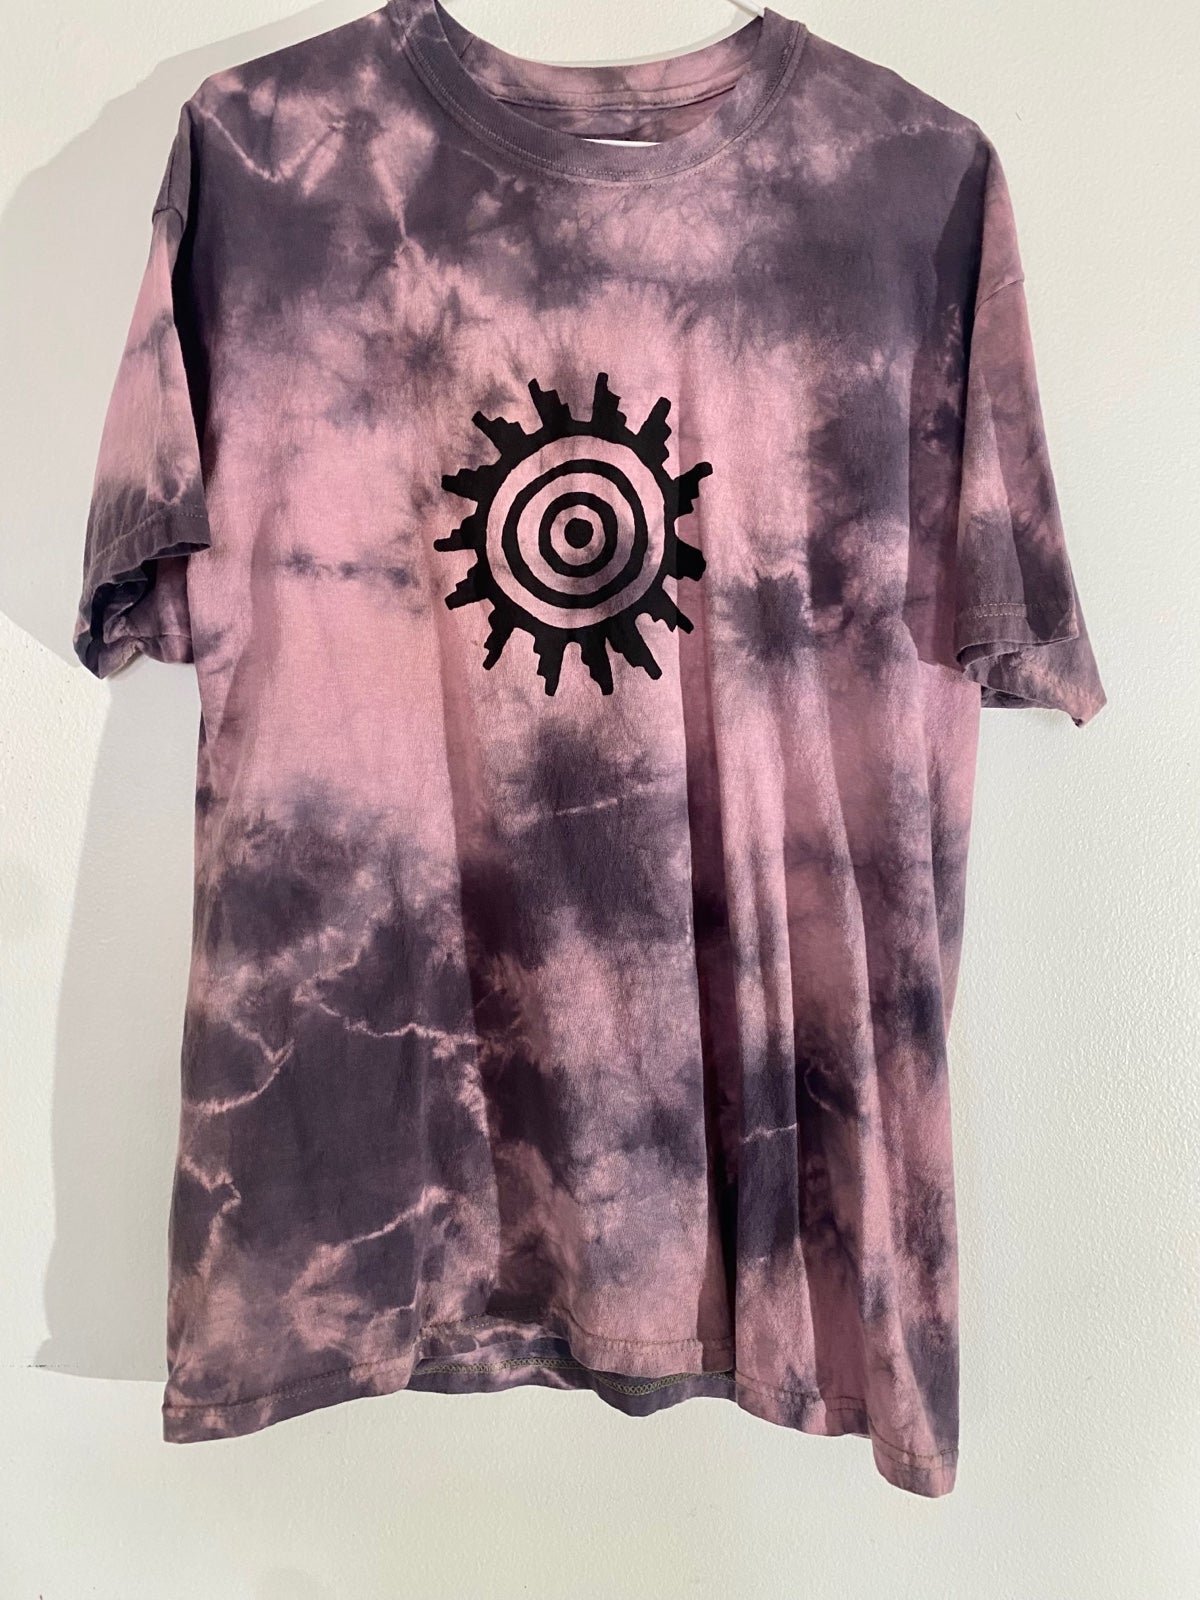 Tie dye Wrinkle T-shirt with Print Art size Large P134OY4zo